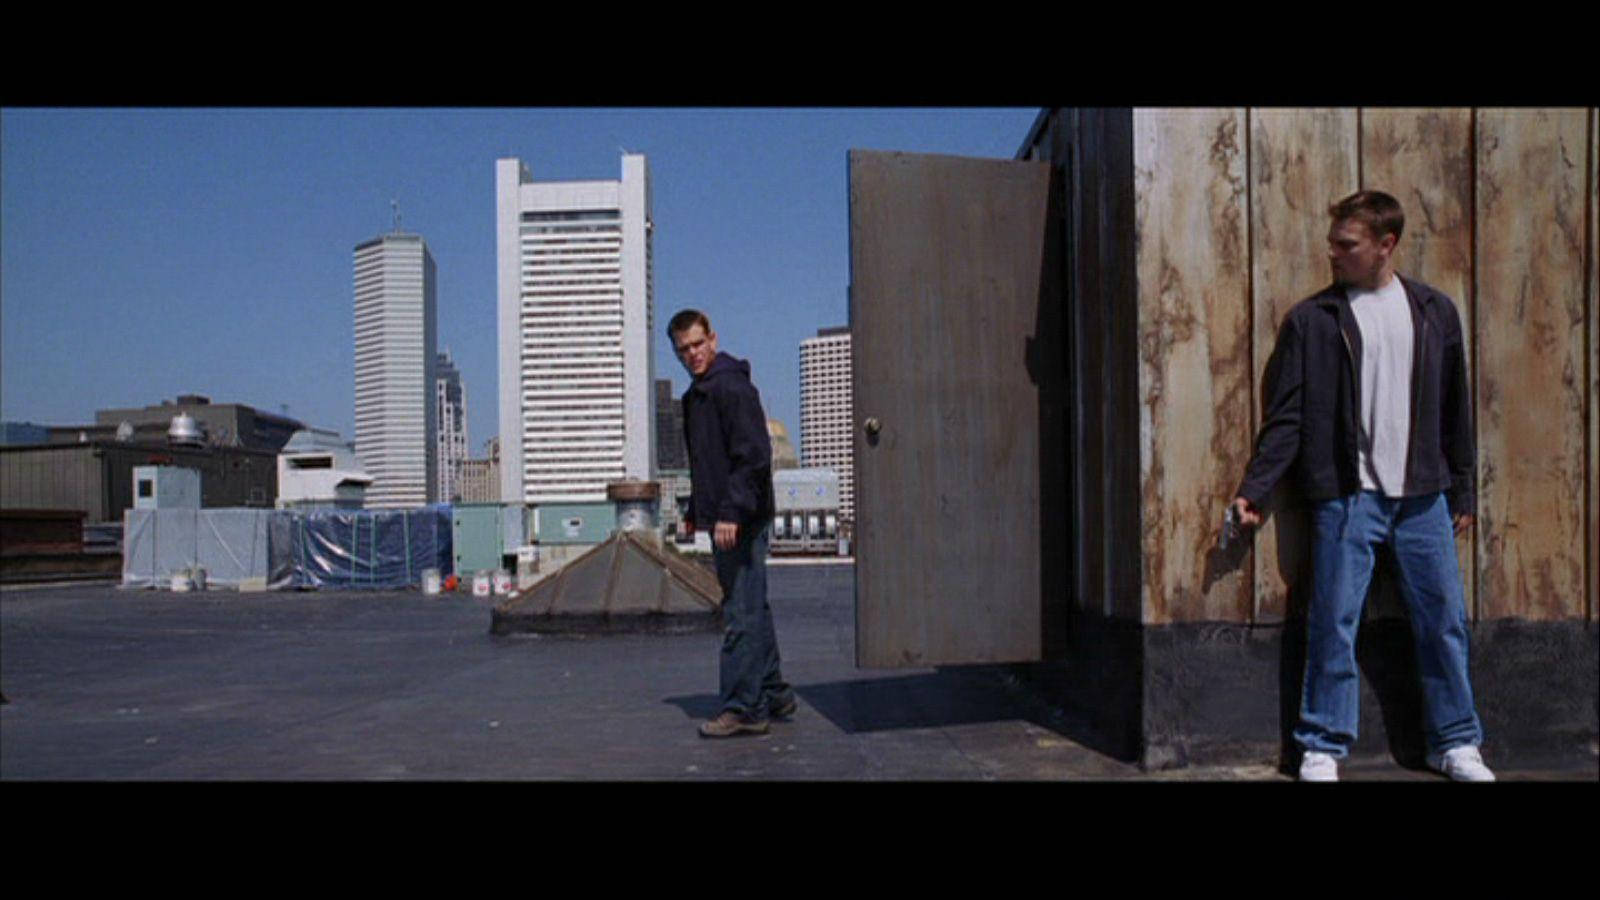 Undercover Agent on the Roof - The Departed Wallpaper